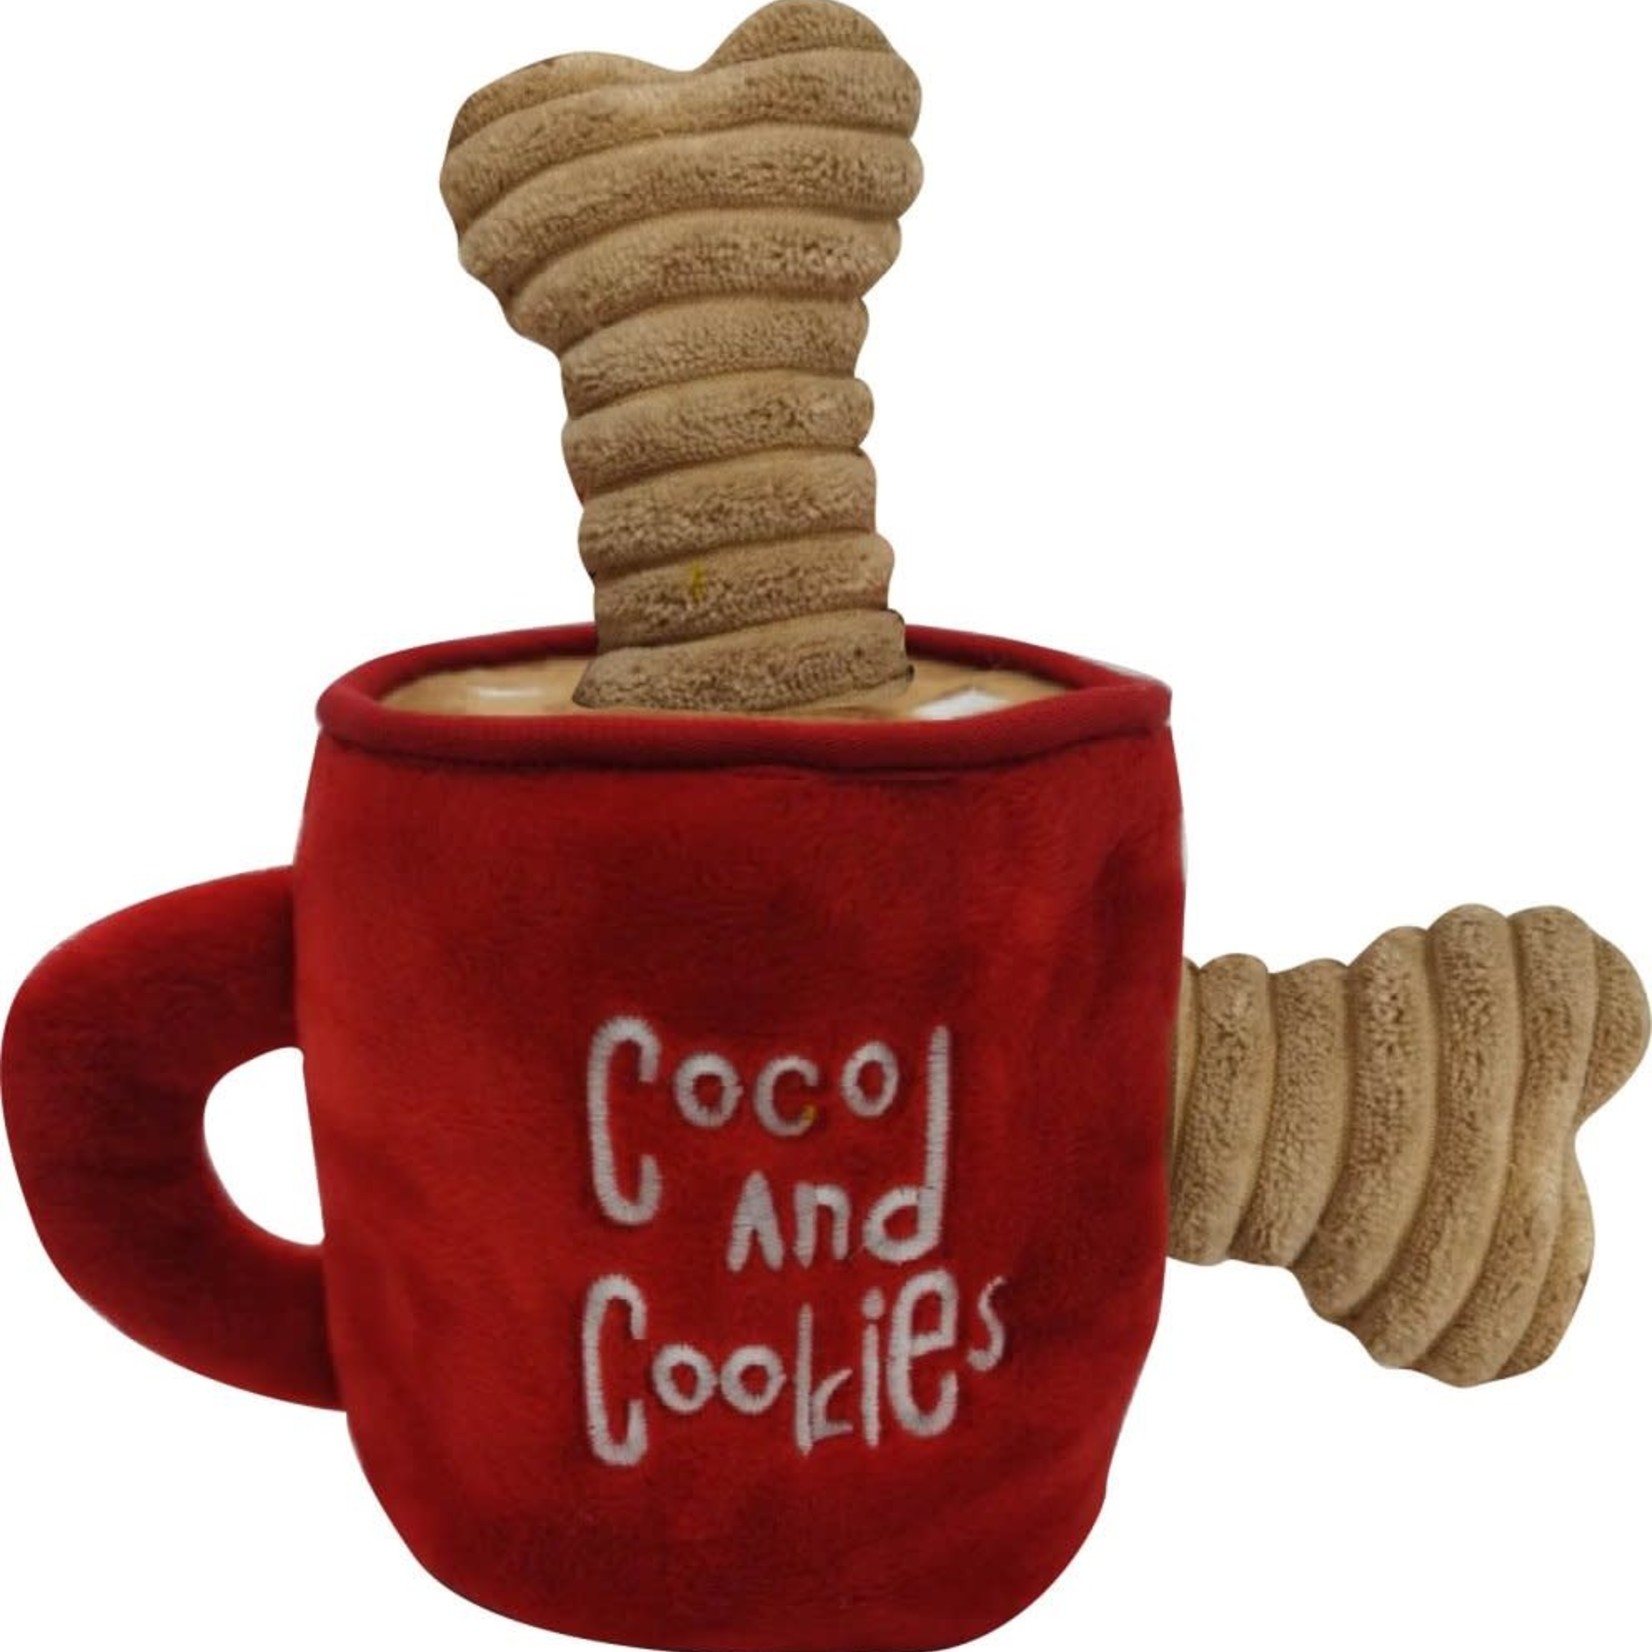 TALL TAILS Plush Mug of Coco and Cookies